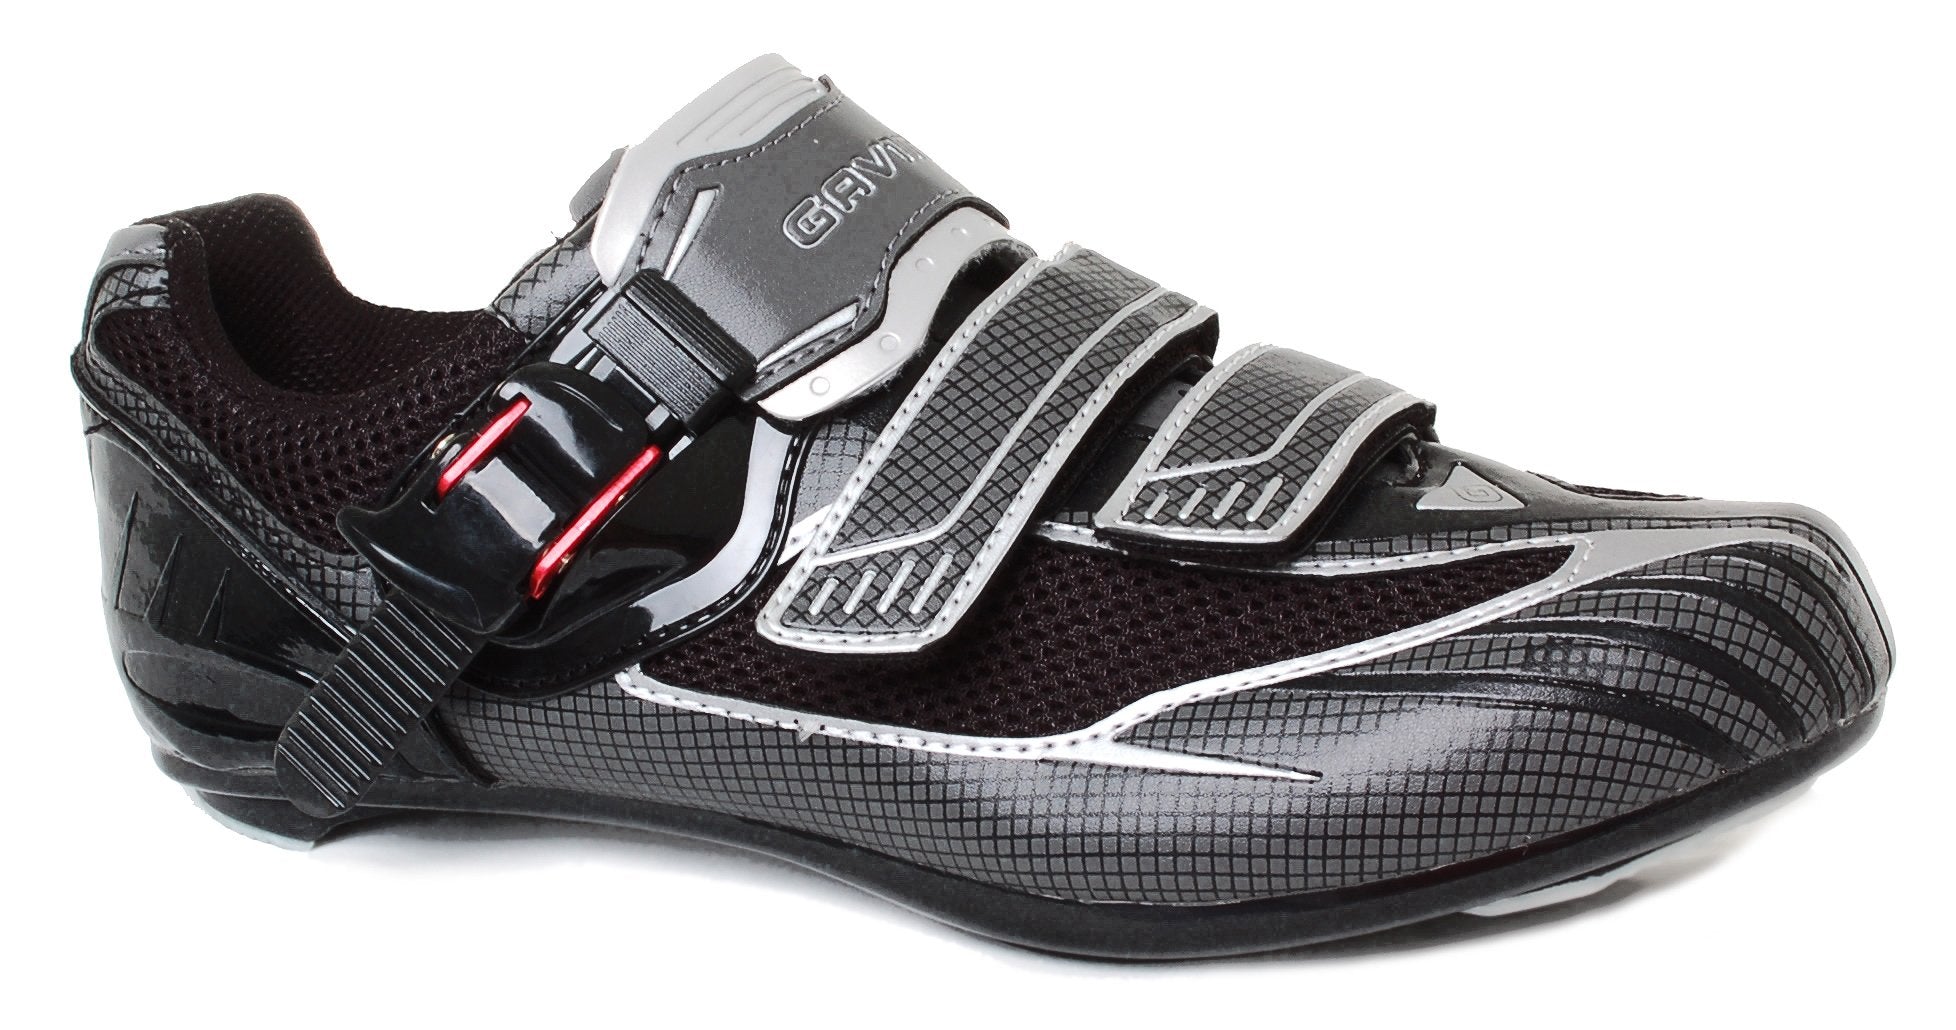 Gavin Elite Road Cycling Shoe - 2 and 3 